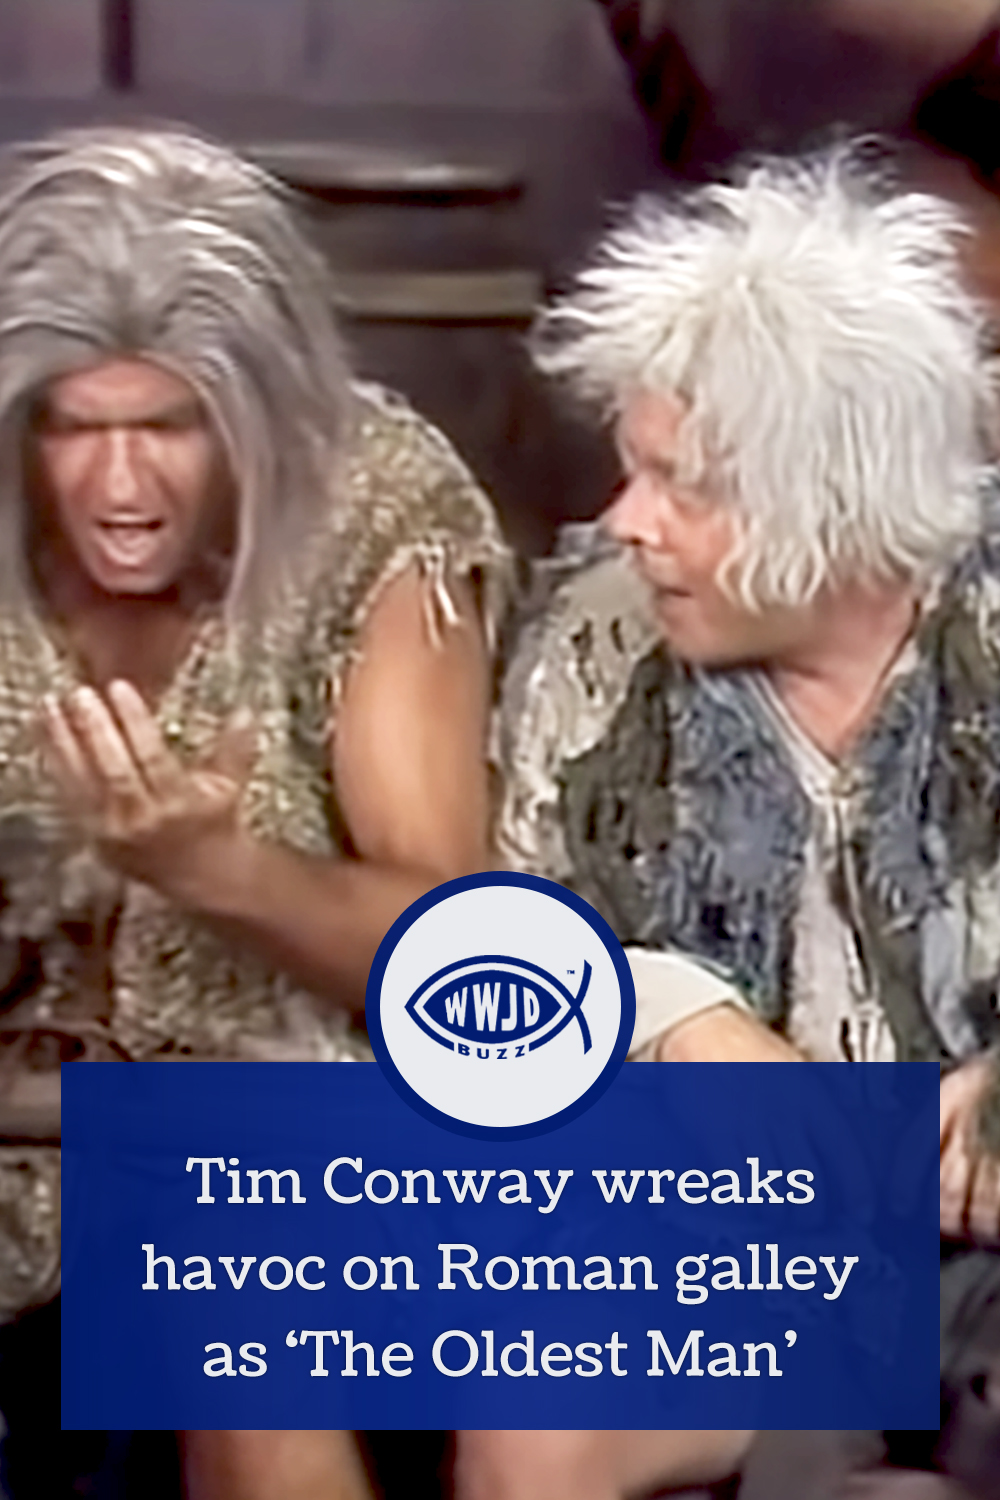 Tim Conway wreaks havoc on Roman galley as \'The Oldest Man\'